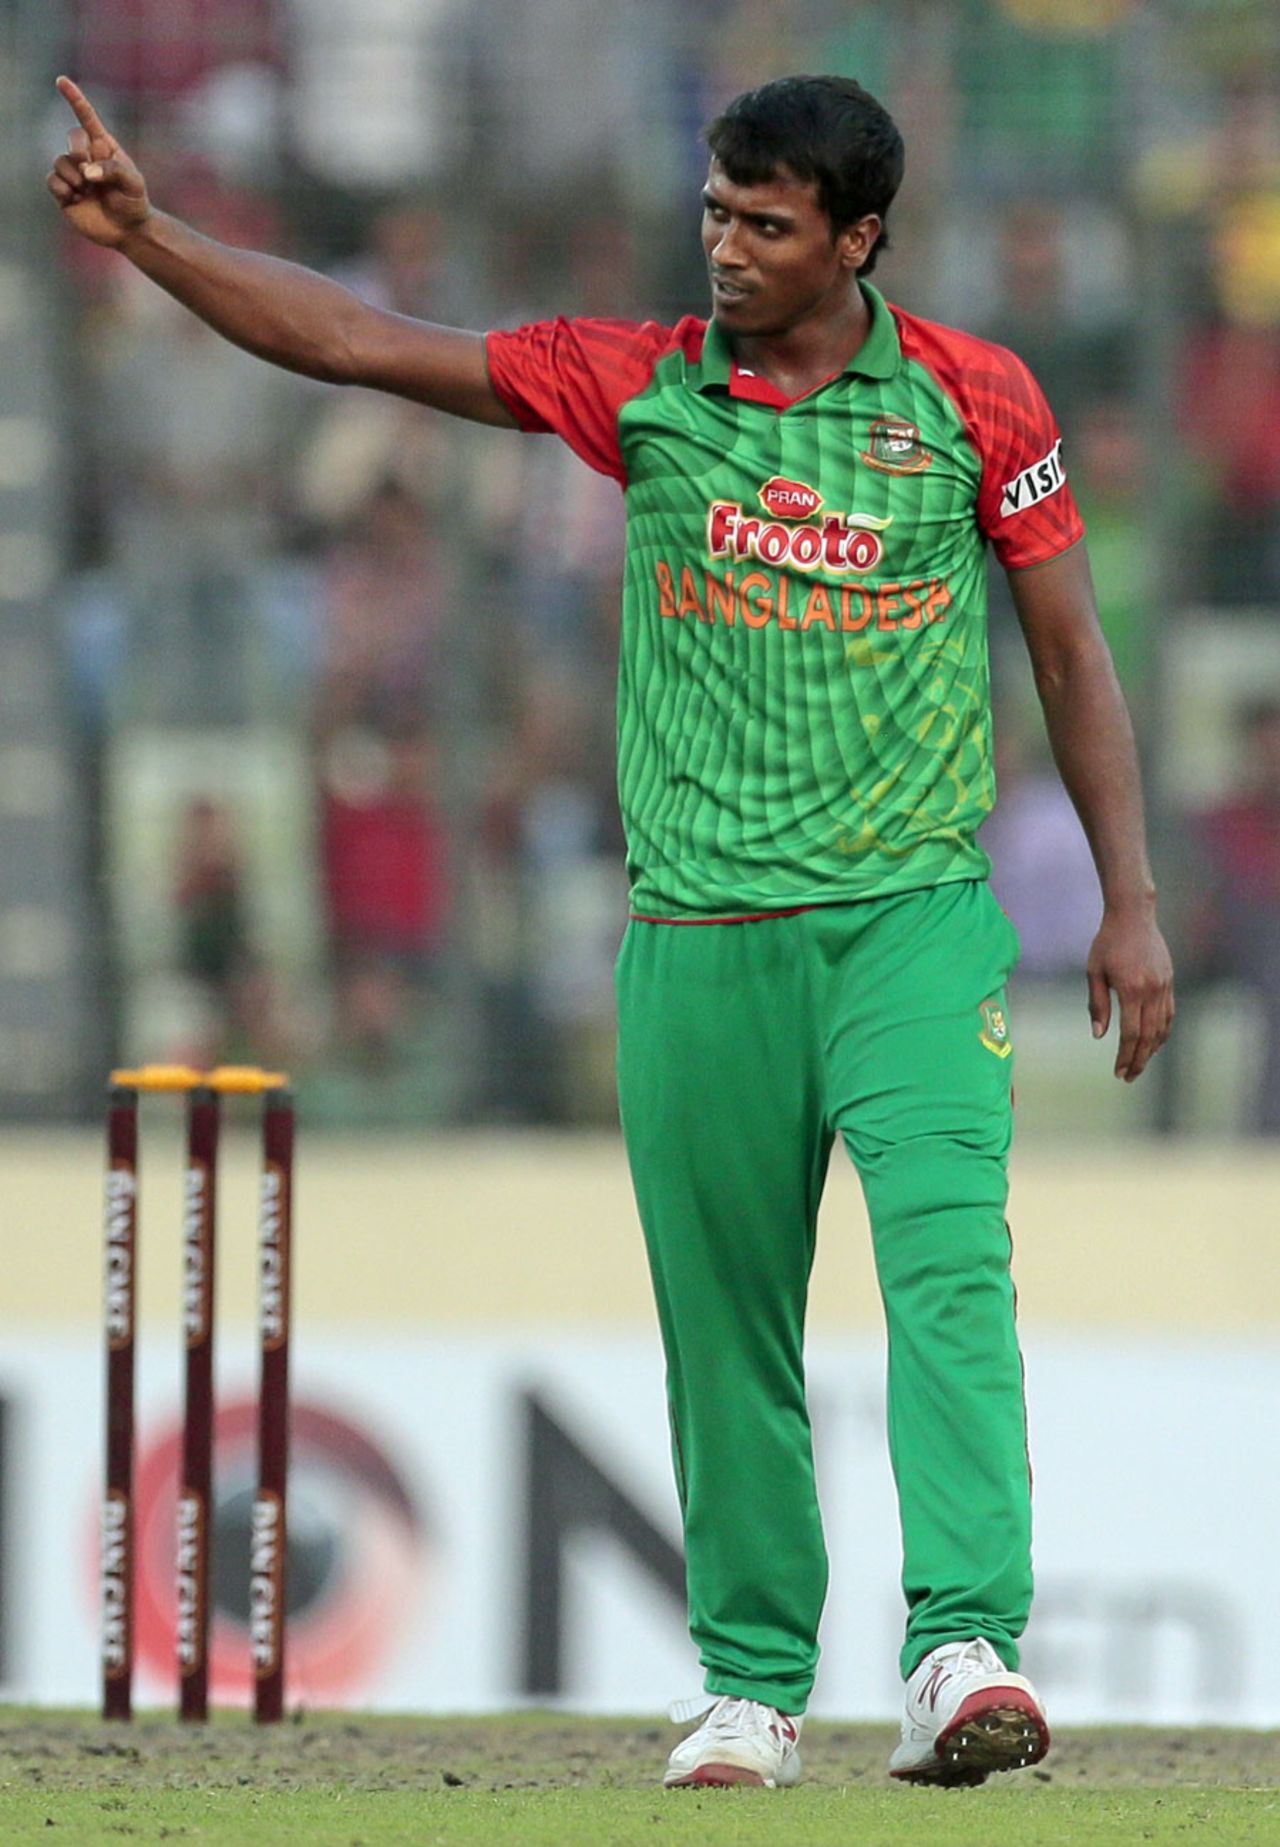 Rubel Hossain played his part in the collapse with 2 for 43, Bangladesh v Pakistan, 3rd ODI, Mirpur, April 22, 2015